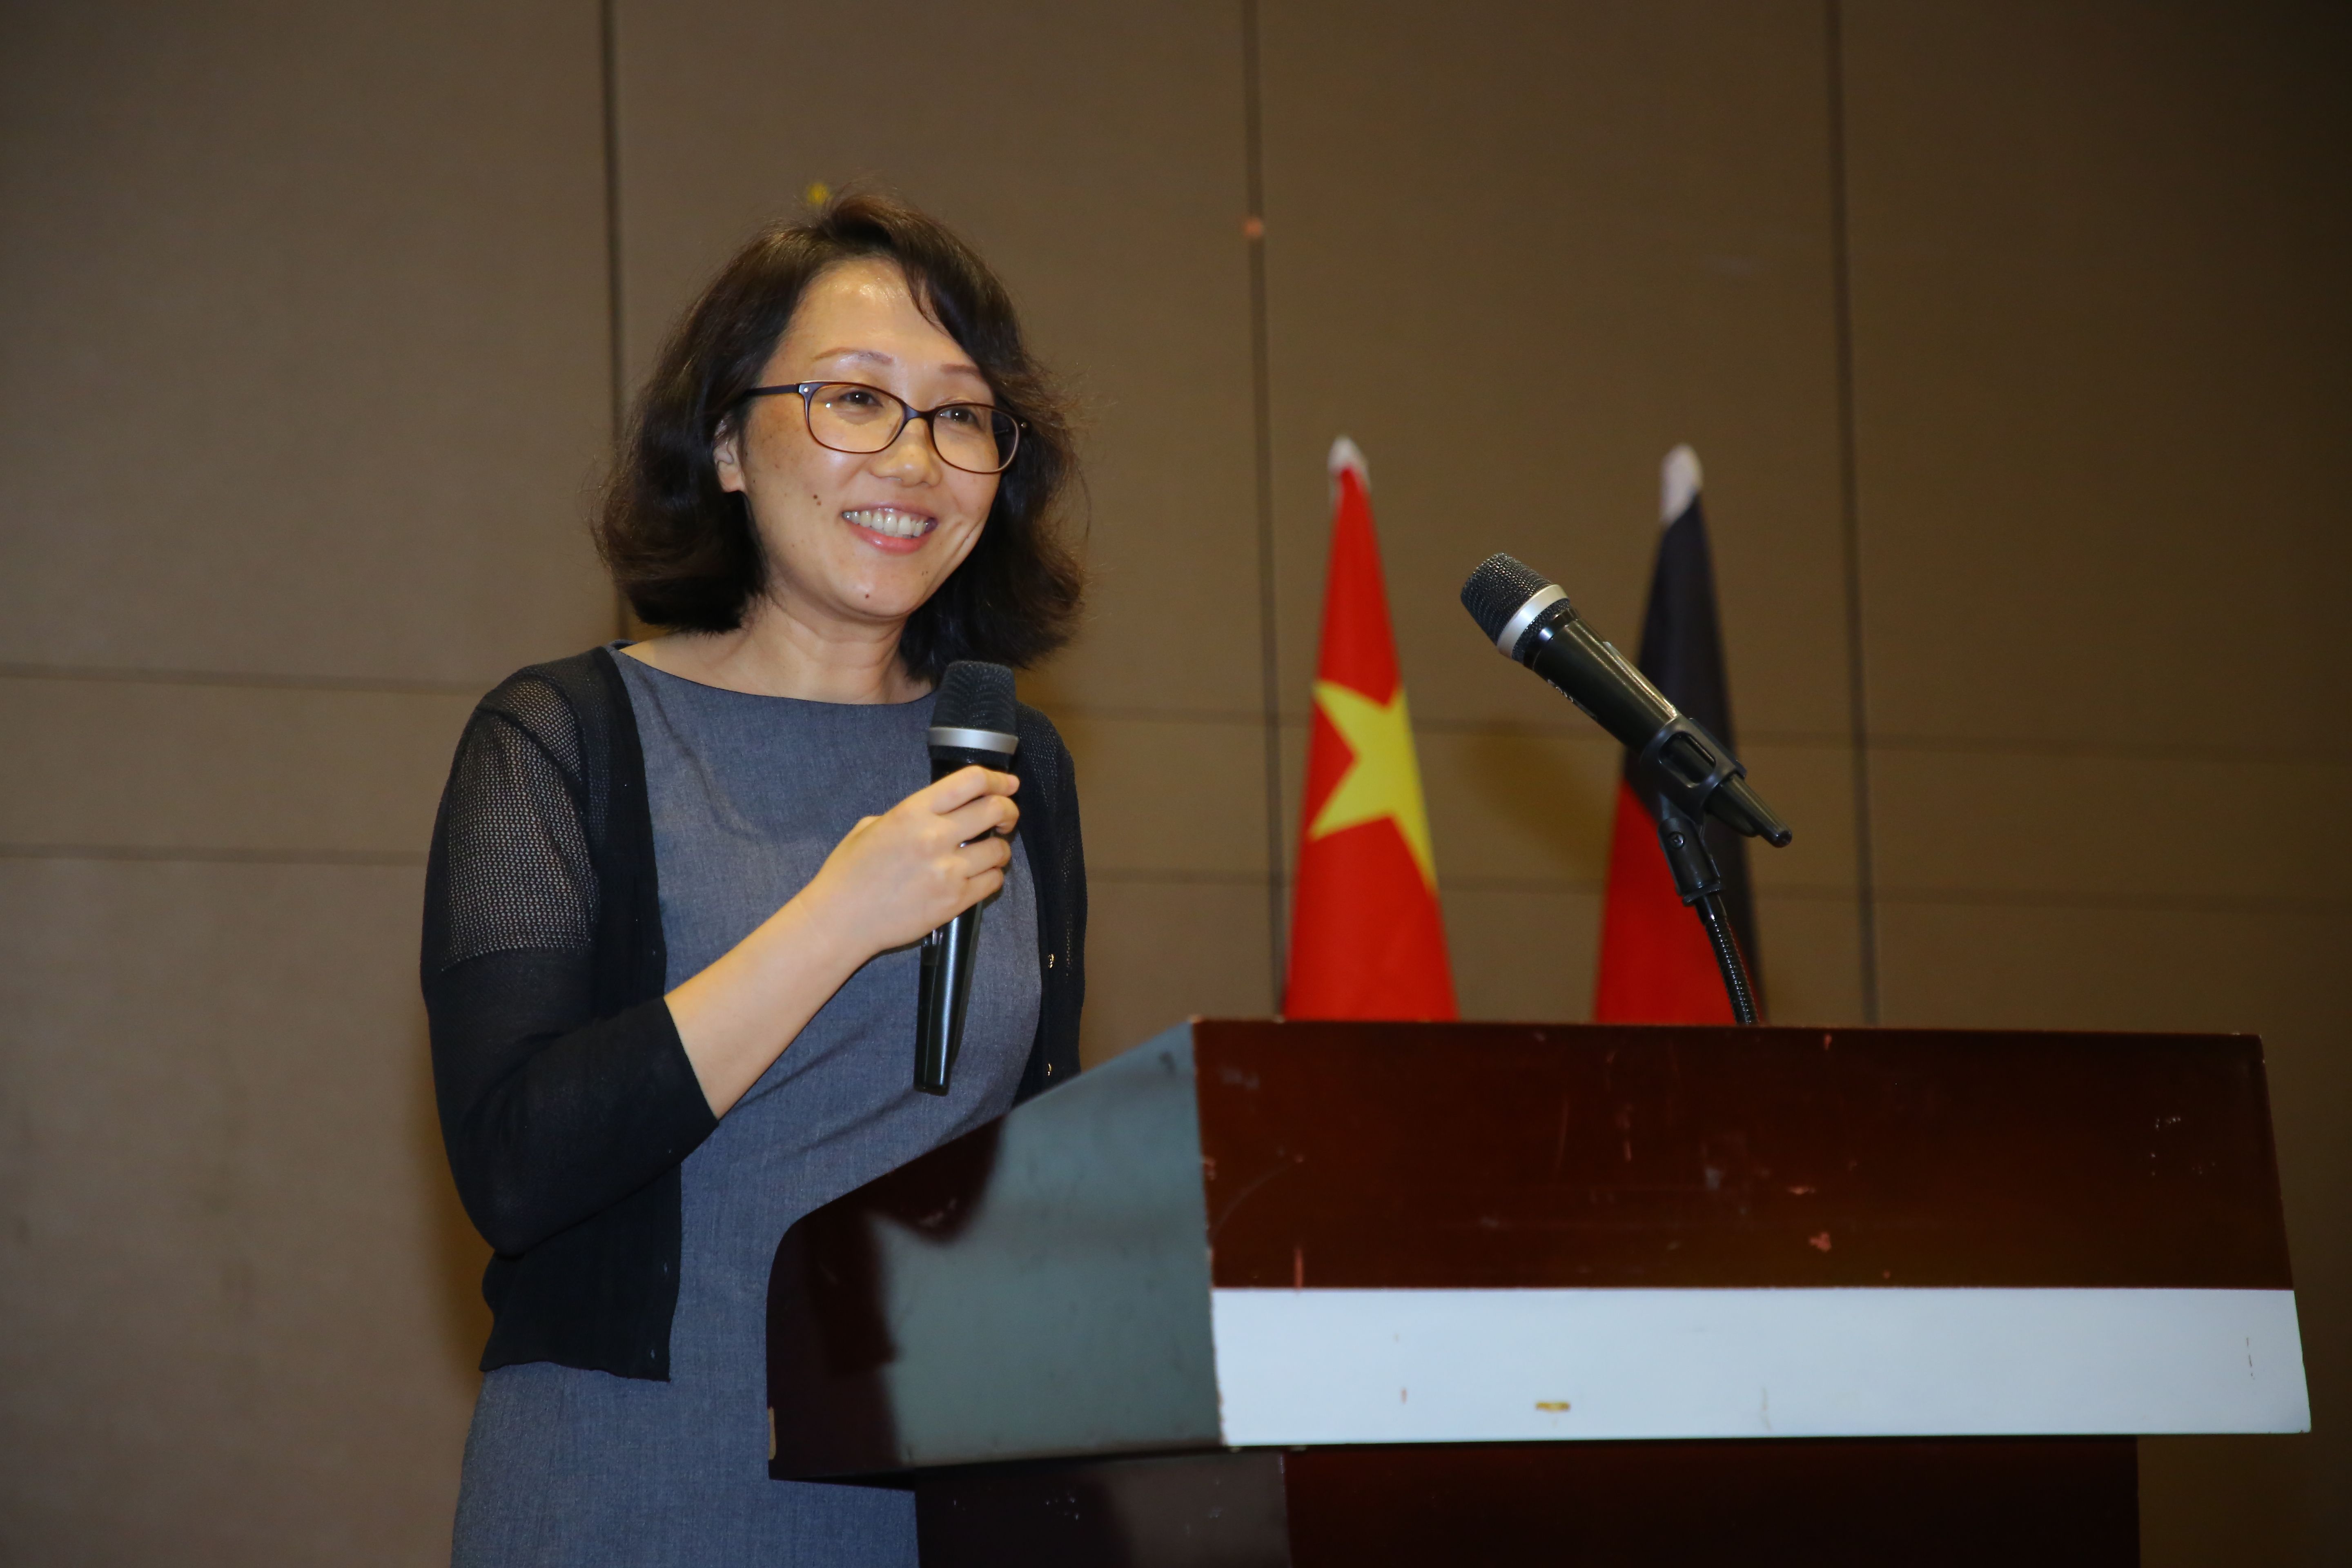 Ms. Yin Yuxia, project director of Sino-German Energy Partnership giving opening speech during the roundtable event, ©CWEA